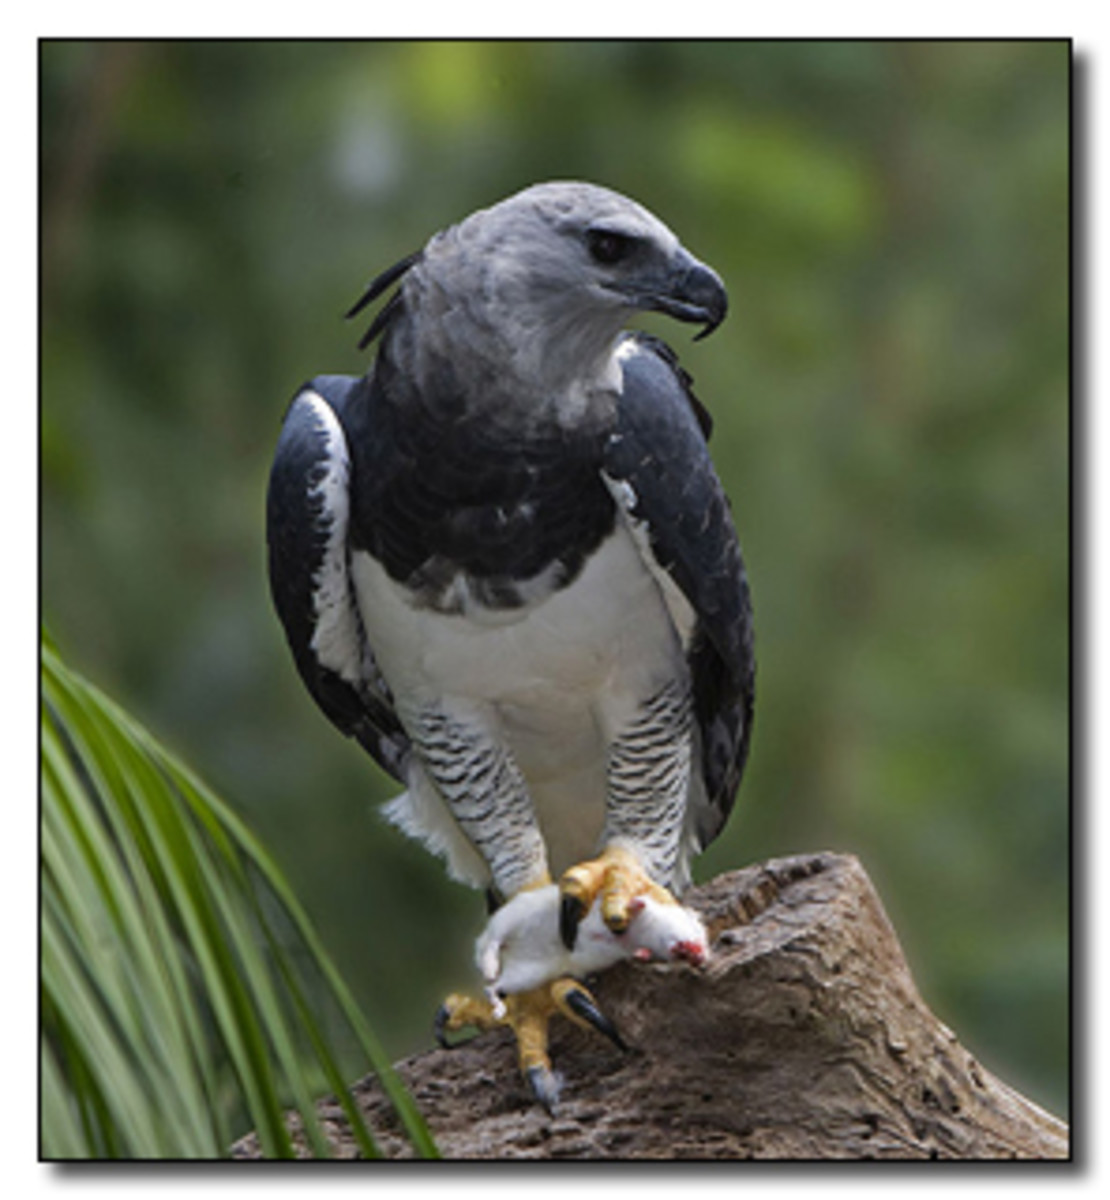 A harpy eagle with a fresh kill. Note the giant claws.